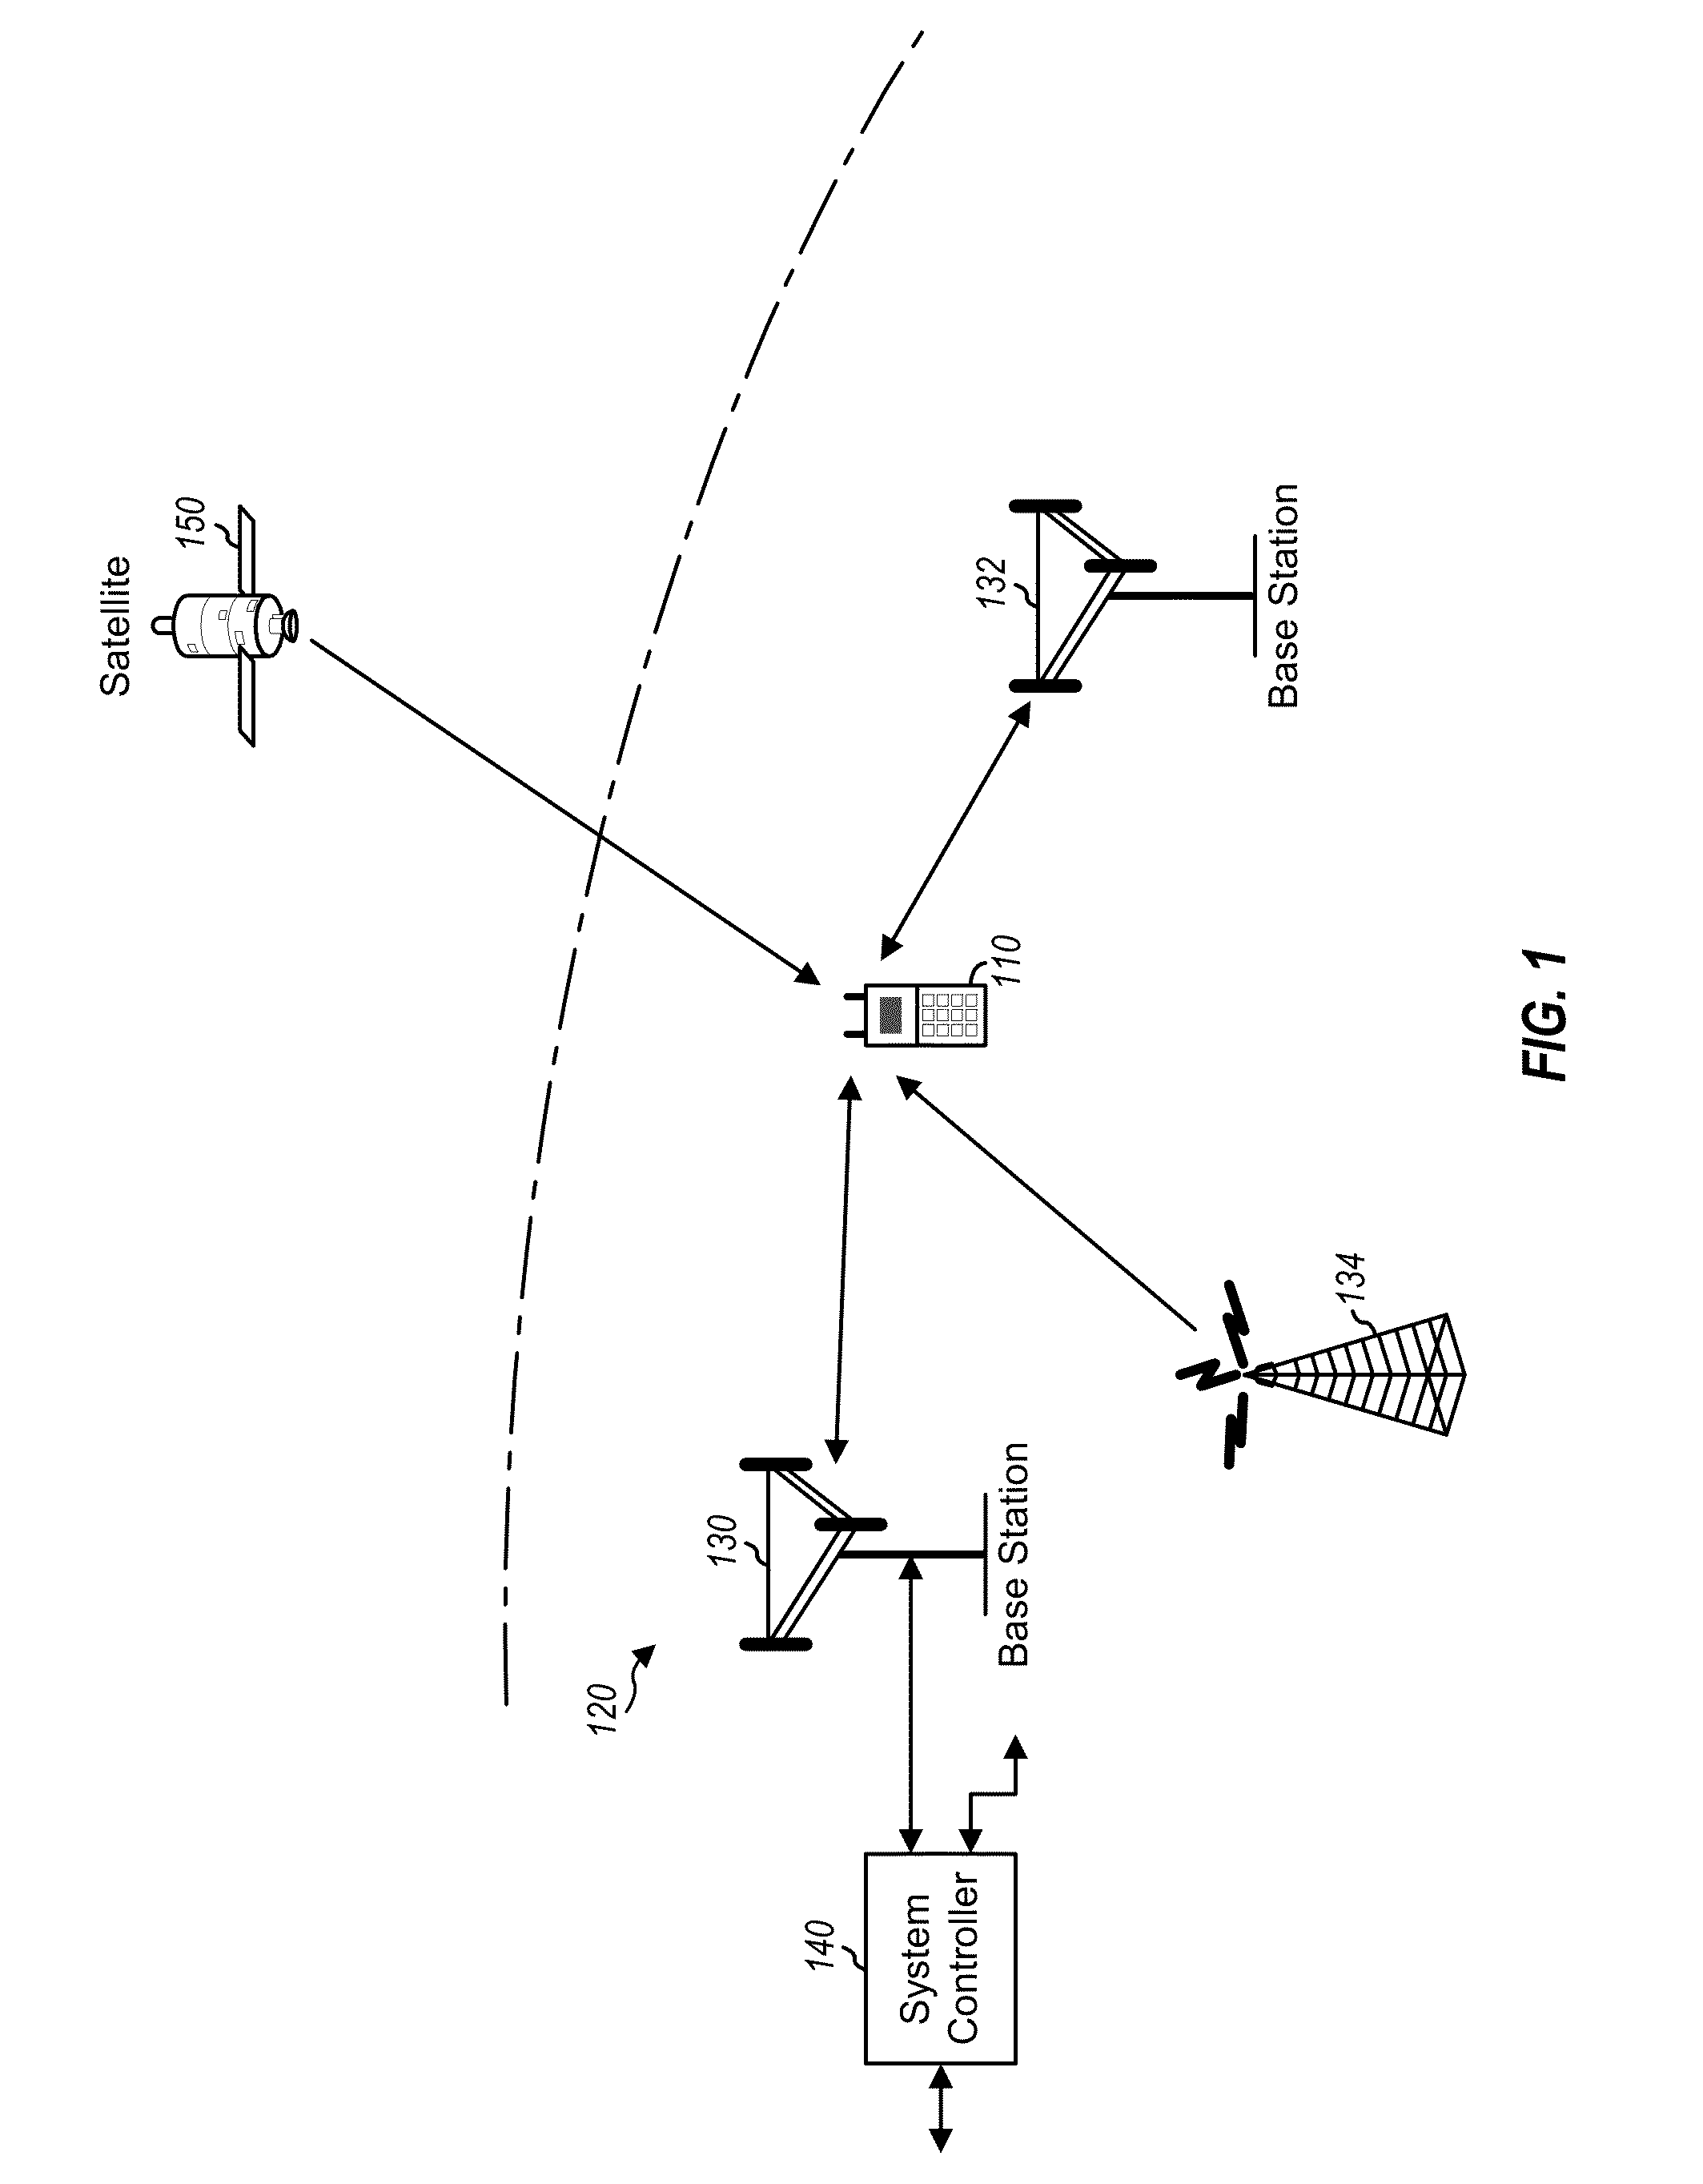 Feedback receive path with RF filter